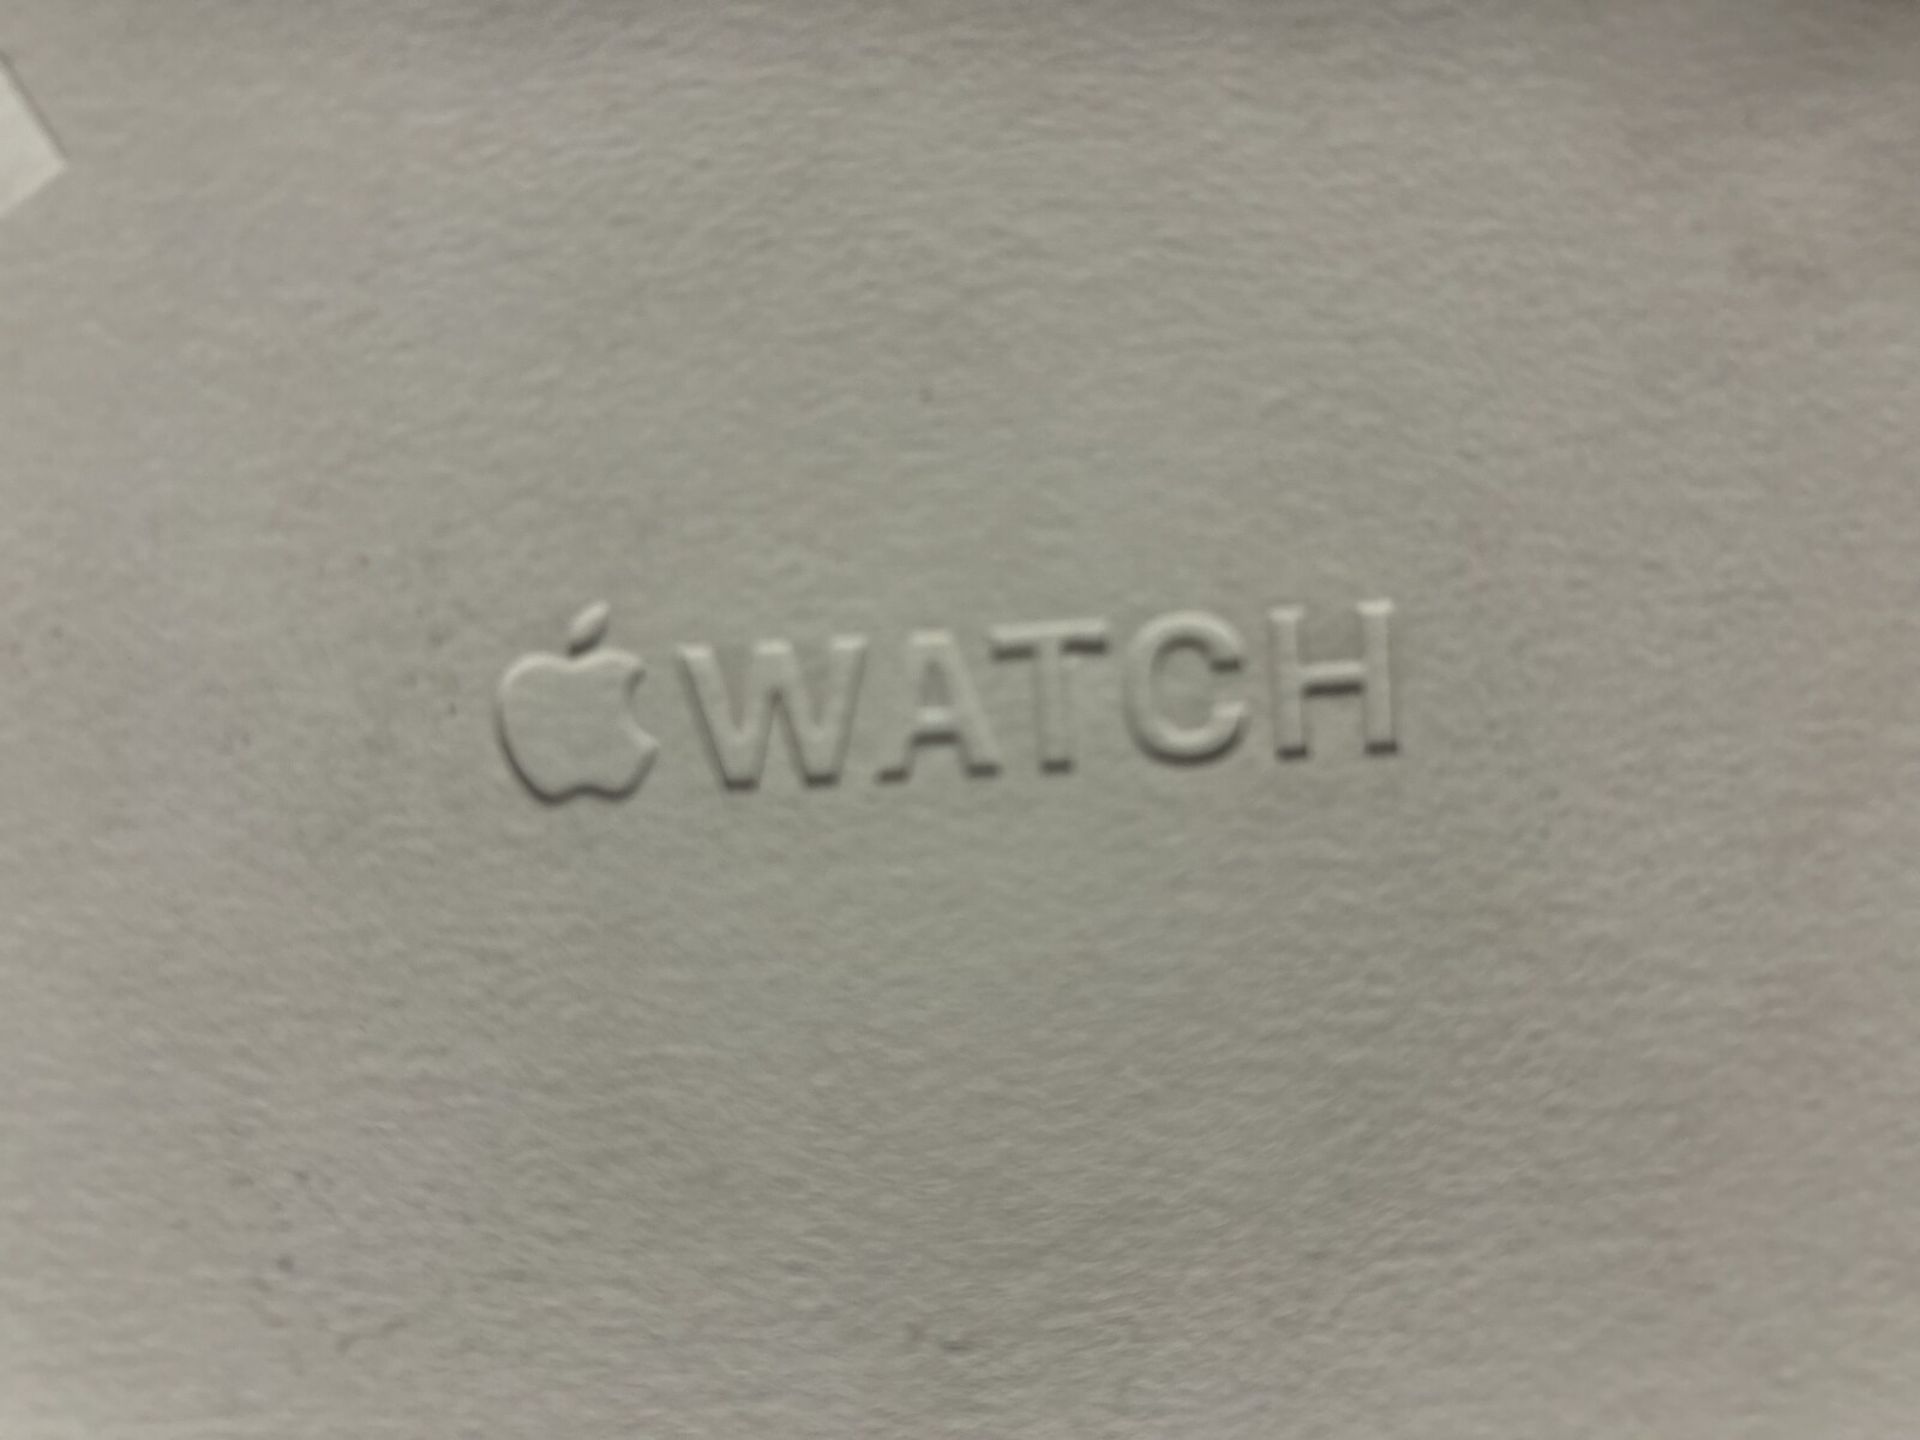 APPLE WATCH (NEW IN BOX) - A26 - Image 2 of 4